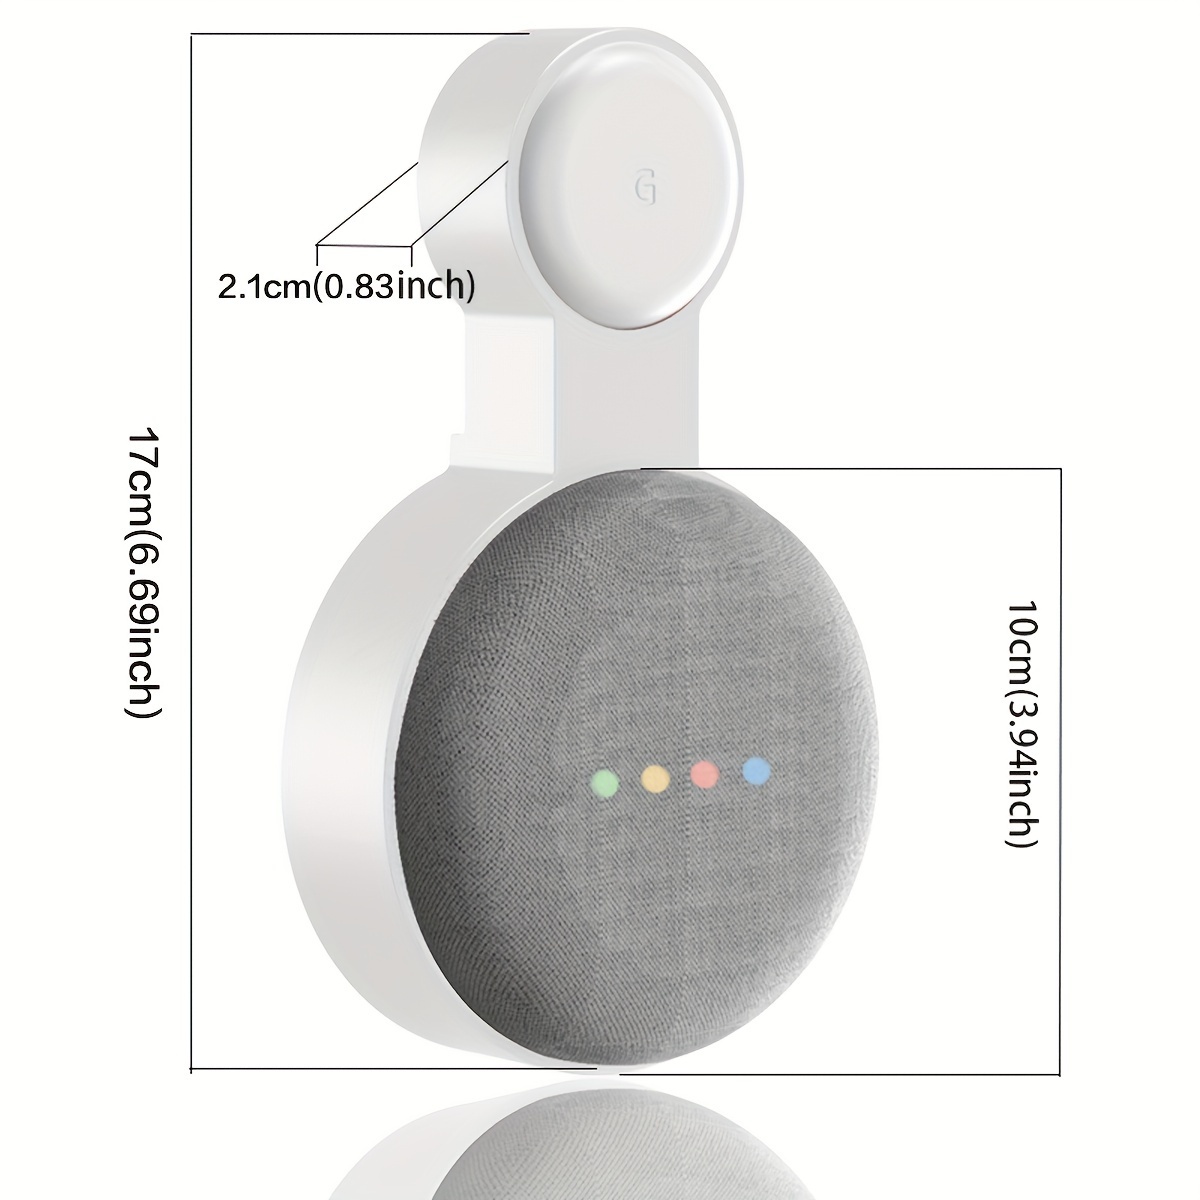 AMORTEK Outlet Wall Mount Holder for Google Home Nest Mini (1st & 2nd  Generation), A Space-Saving Accessories for Google Home Mini Voice  Assistant